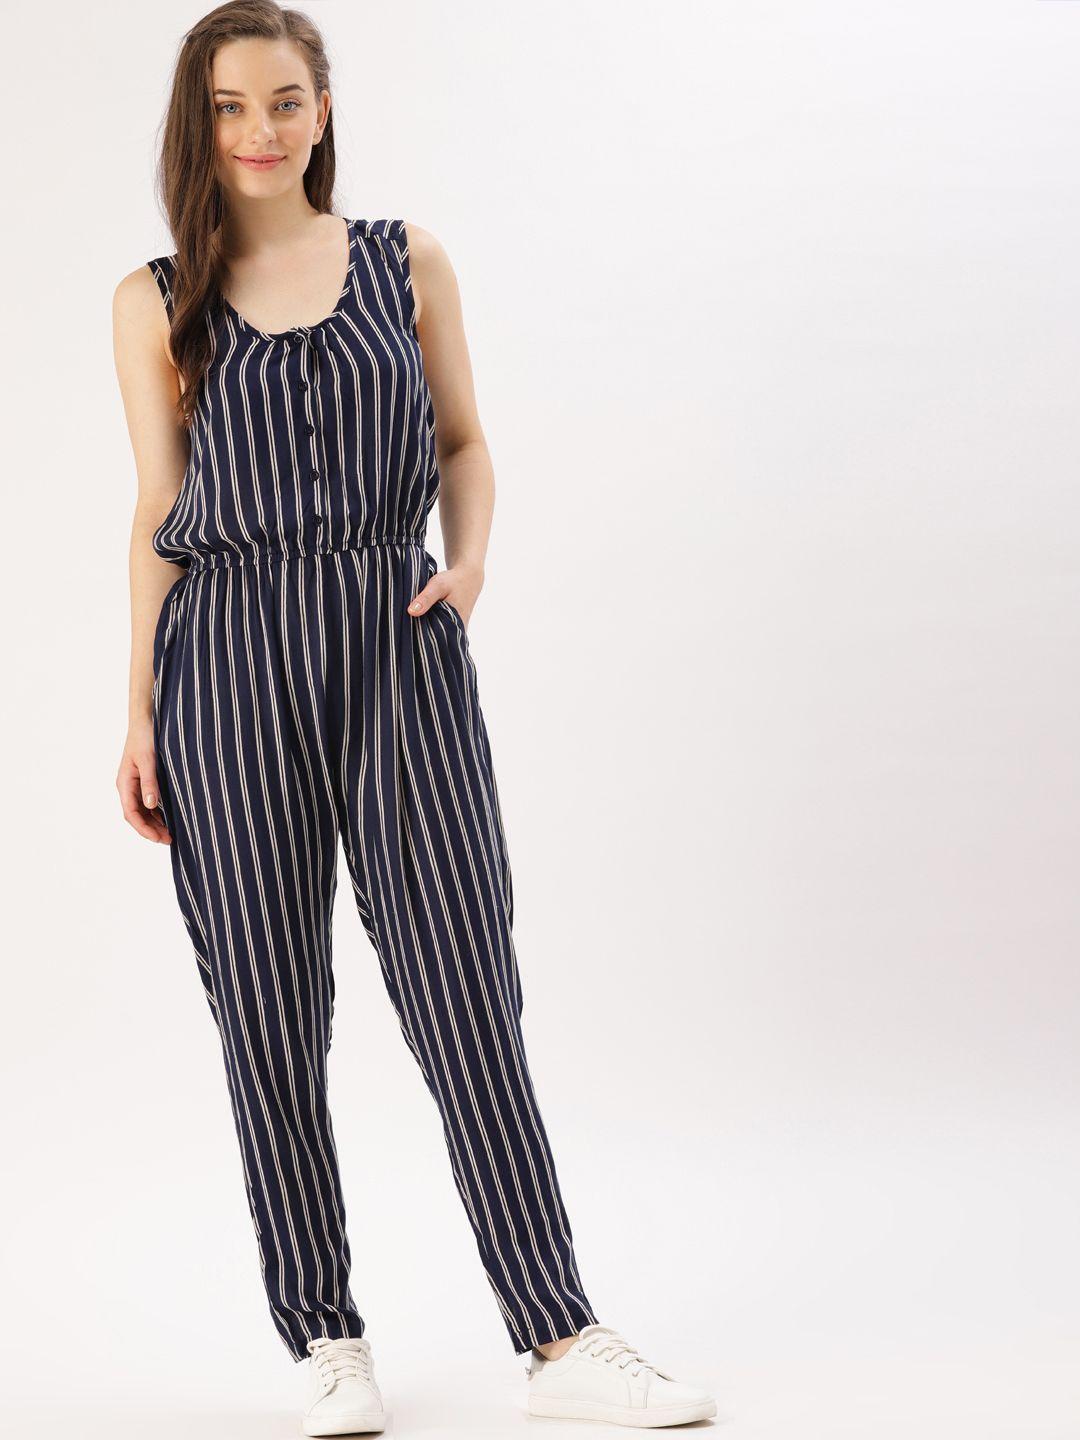 dressberry navy blue & off-white striped basic jumpsuit